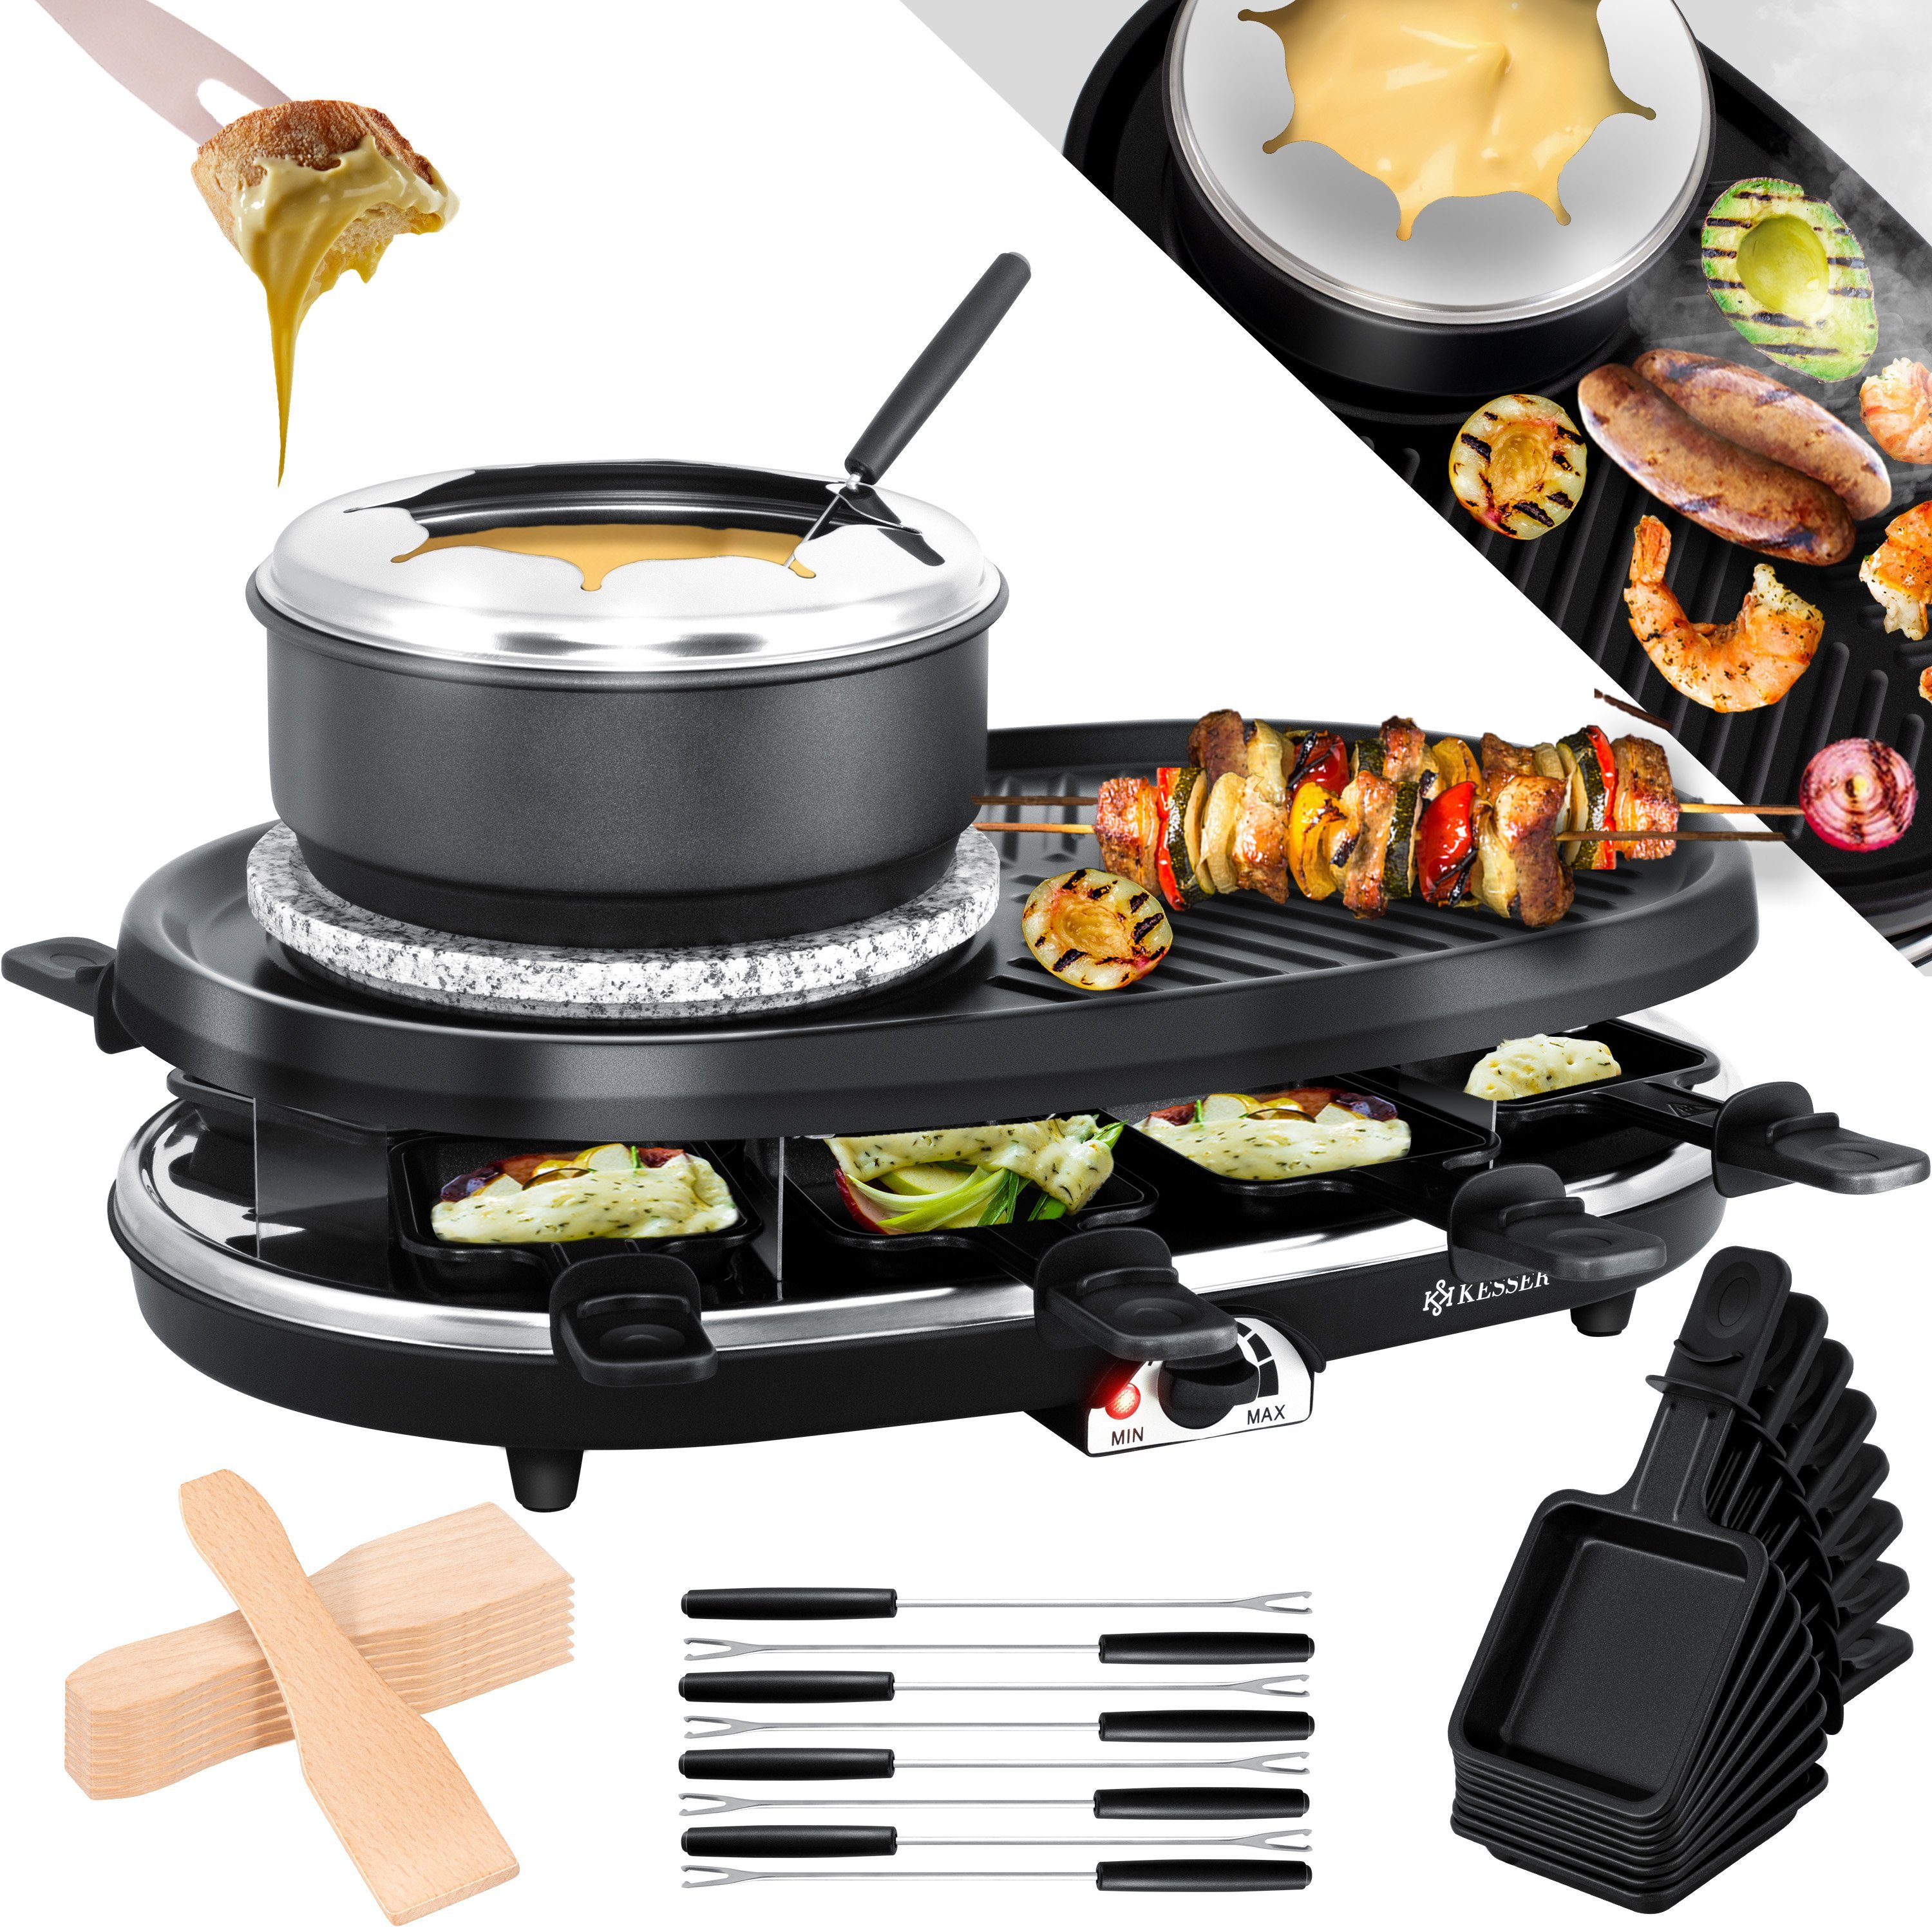 Raclettes online kaufen » Raclette-Grills | OTTO